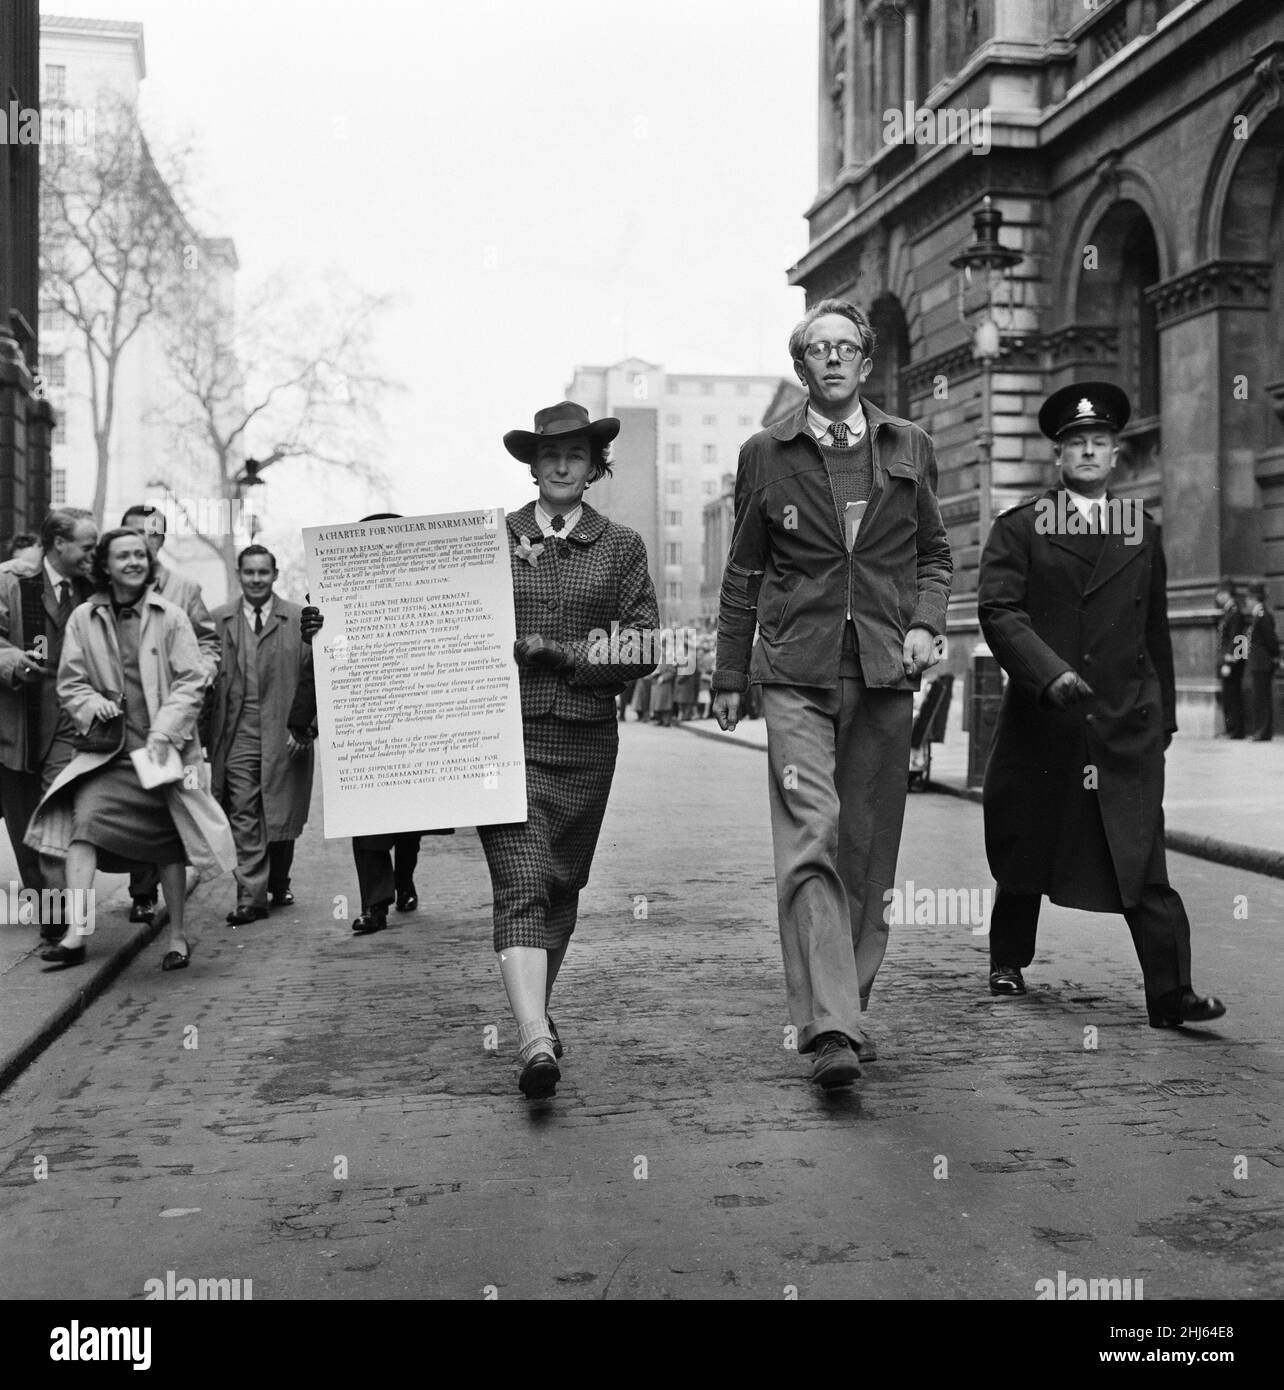 Ban The Bomb movement four day march from the Atomic Weapons Research Establishment at Aldermaston, Berkshire, to Trafalgar Square, London, Monday 30th March 1959. Our Picture Shows ... Jacquetta Hawkes, archaeologist and writer, heads to Downing Street, to deliver an Anti H Bomb Charter to the Prime Minister.   The second annual Easter march was organised by the Campaign for Nuclear Disarmament.  Tens of thousands of people marked the end of the Aldermaston march with a rally in central London. This was the largest demonstration London had seen in the 20th Century. Stock Photo